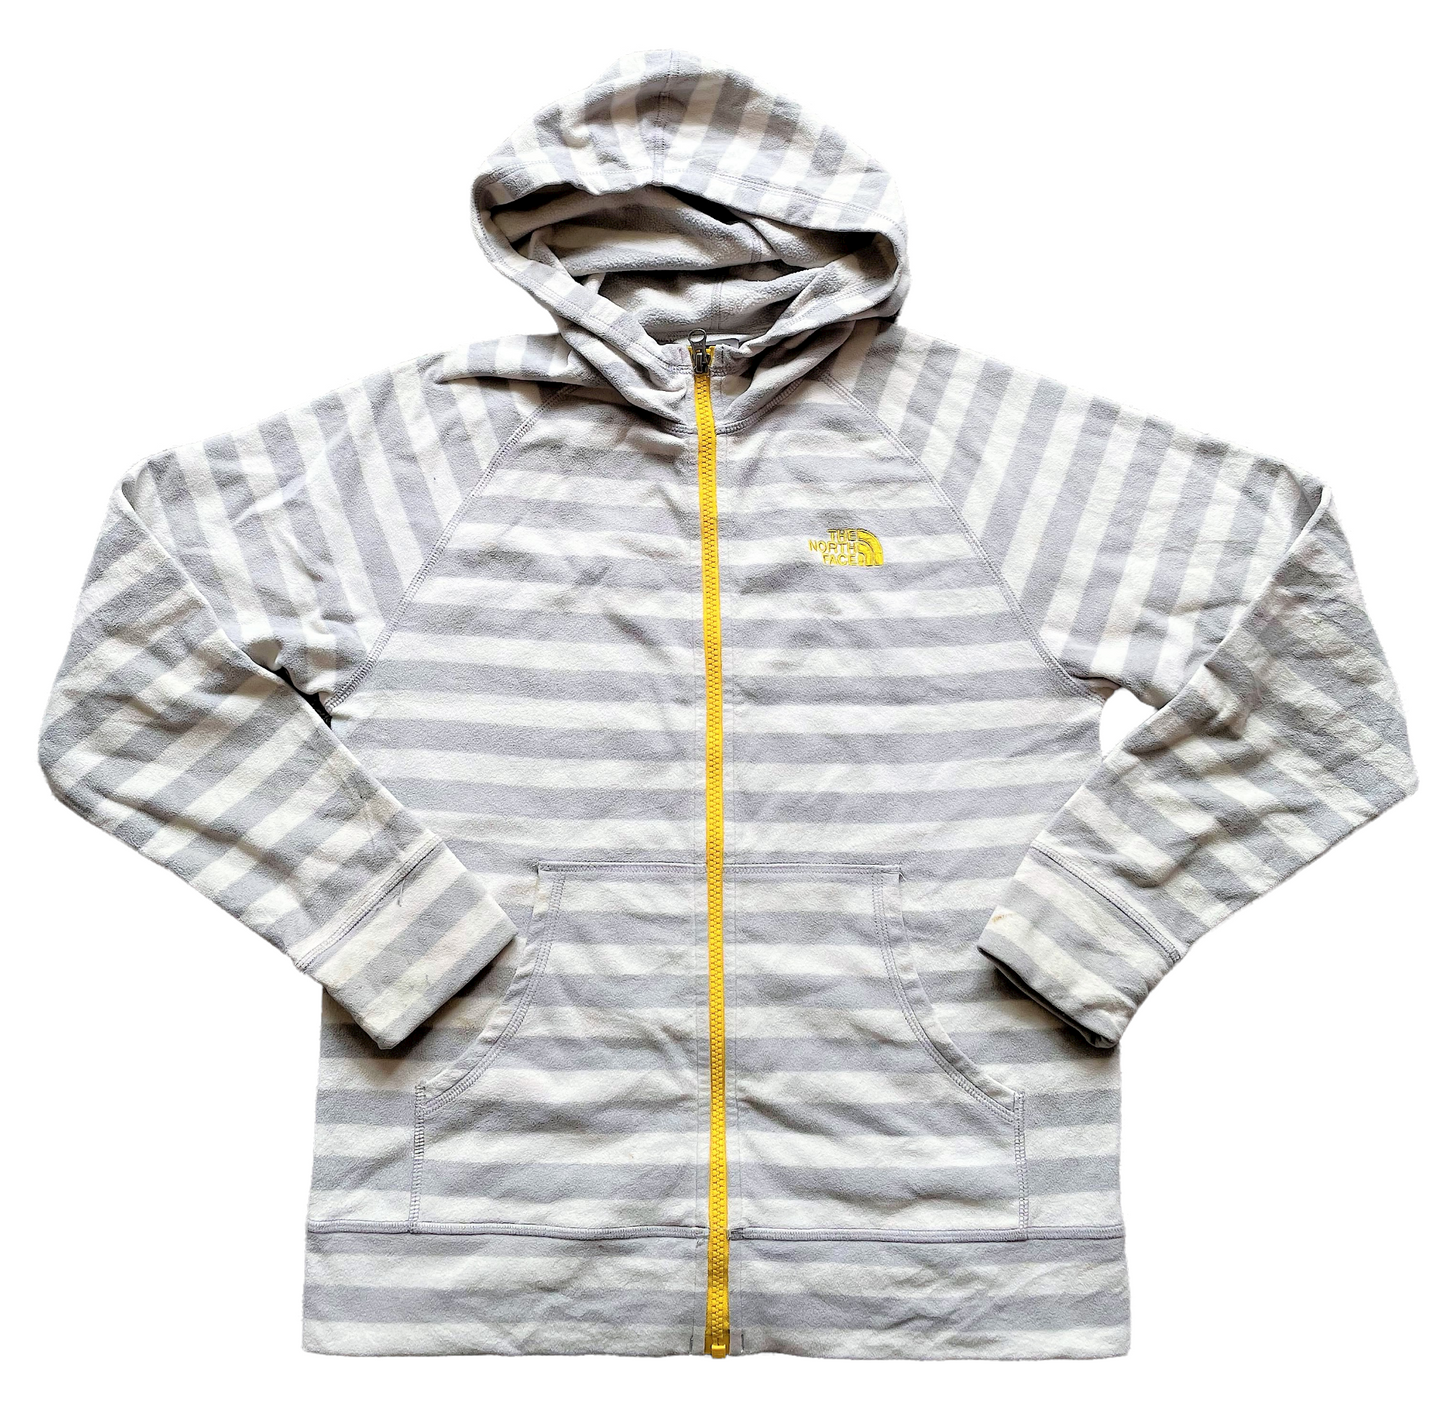 The North Face Hooped Hoodie (good) Ladies 14 to 16